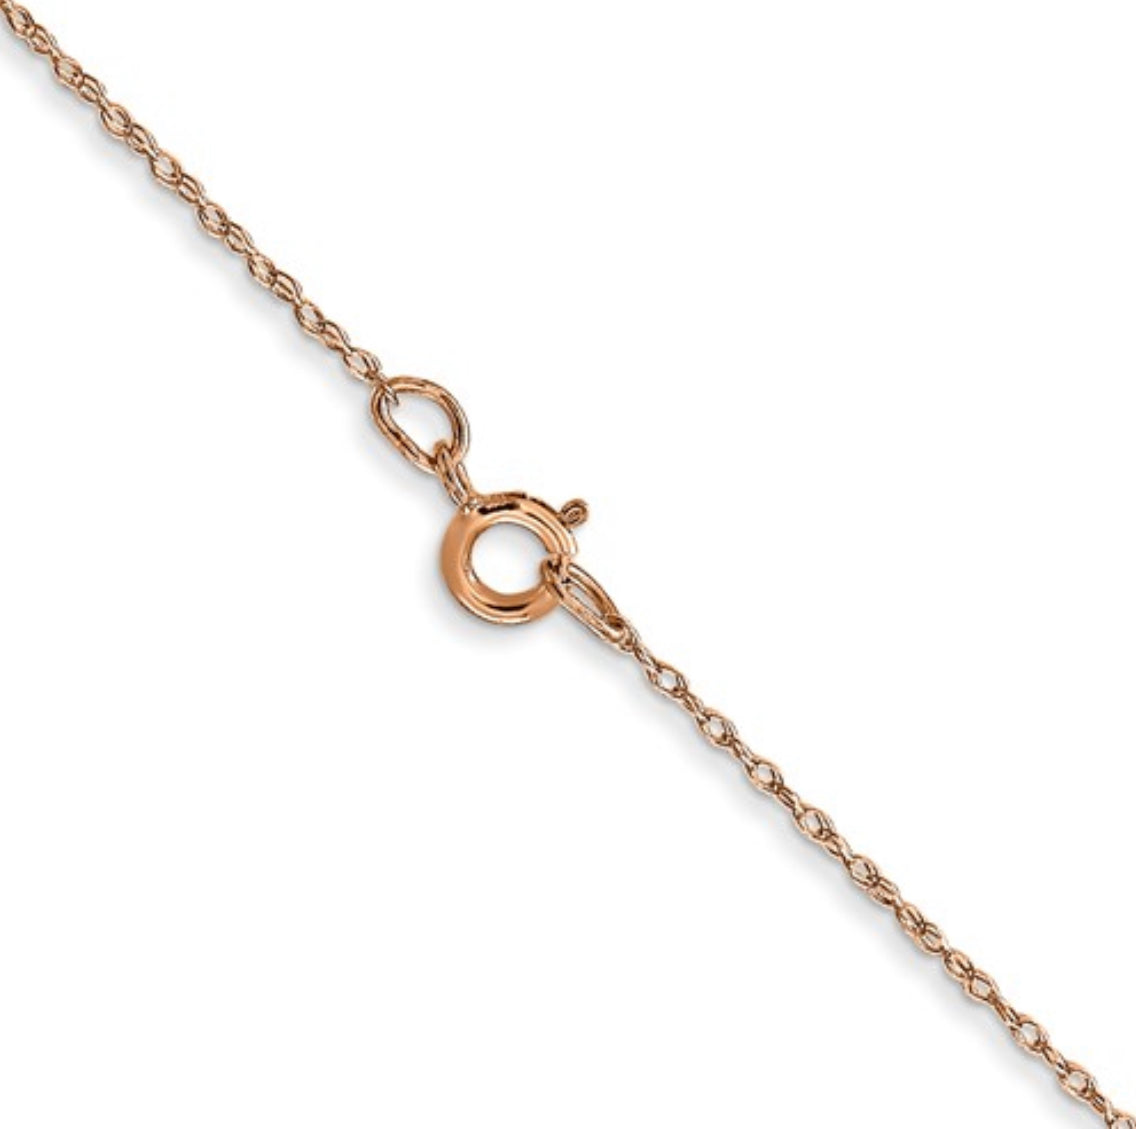 14K Rose Gold Carded Cable Chain with Spring Clasp - 1.65 mm - Various Length